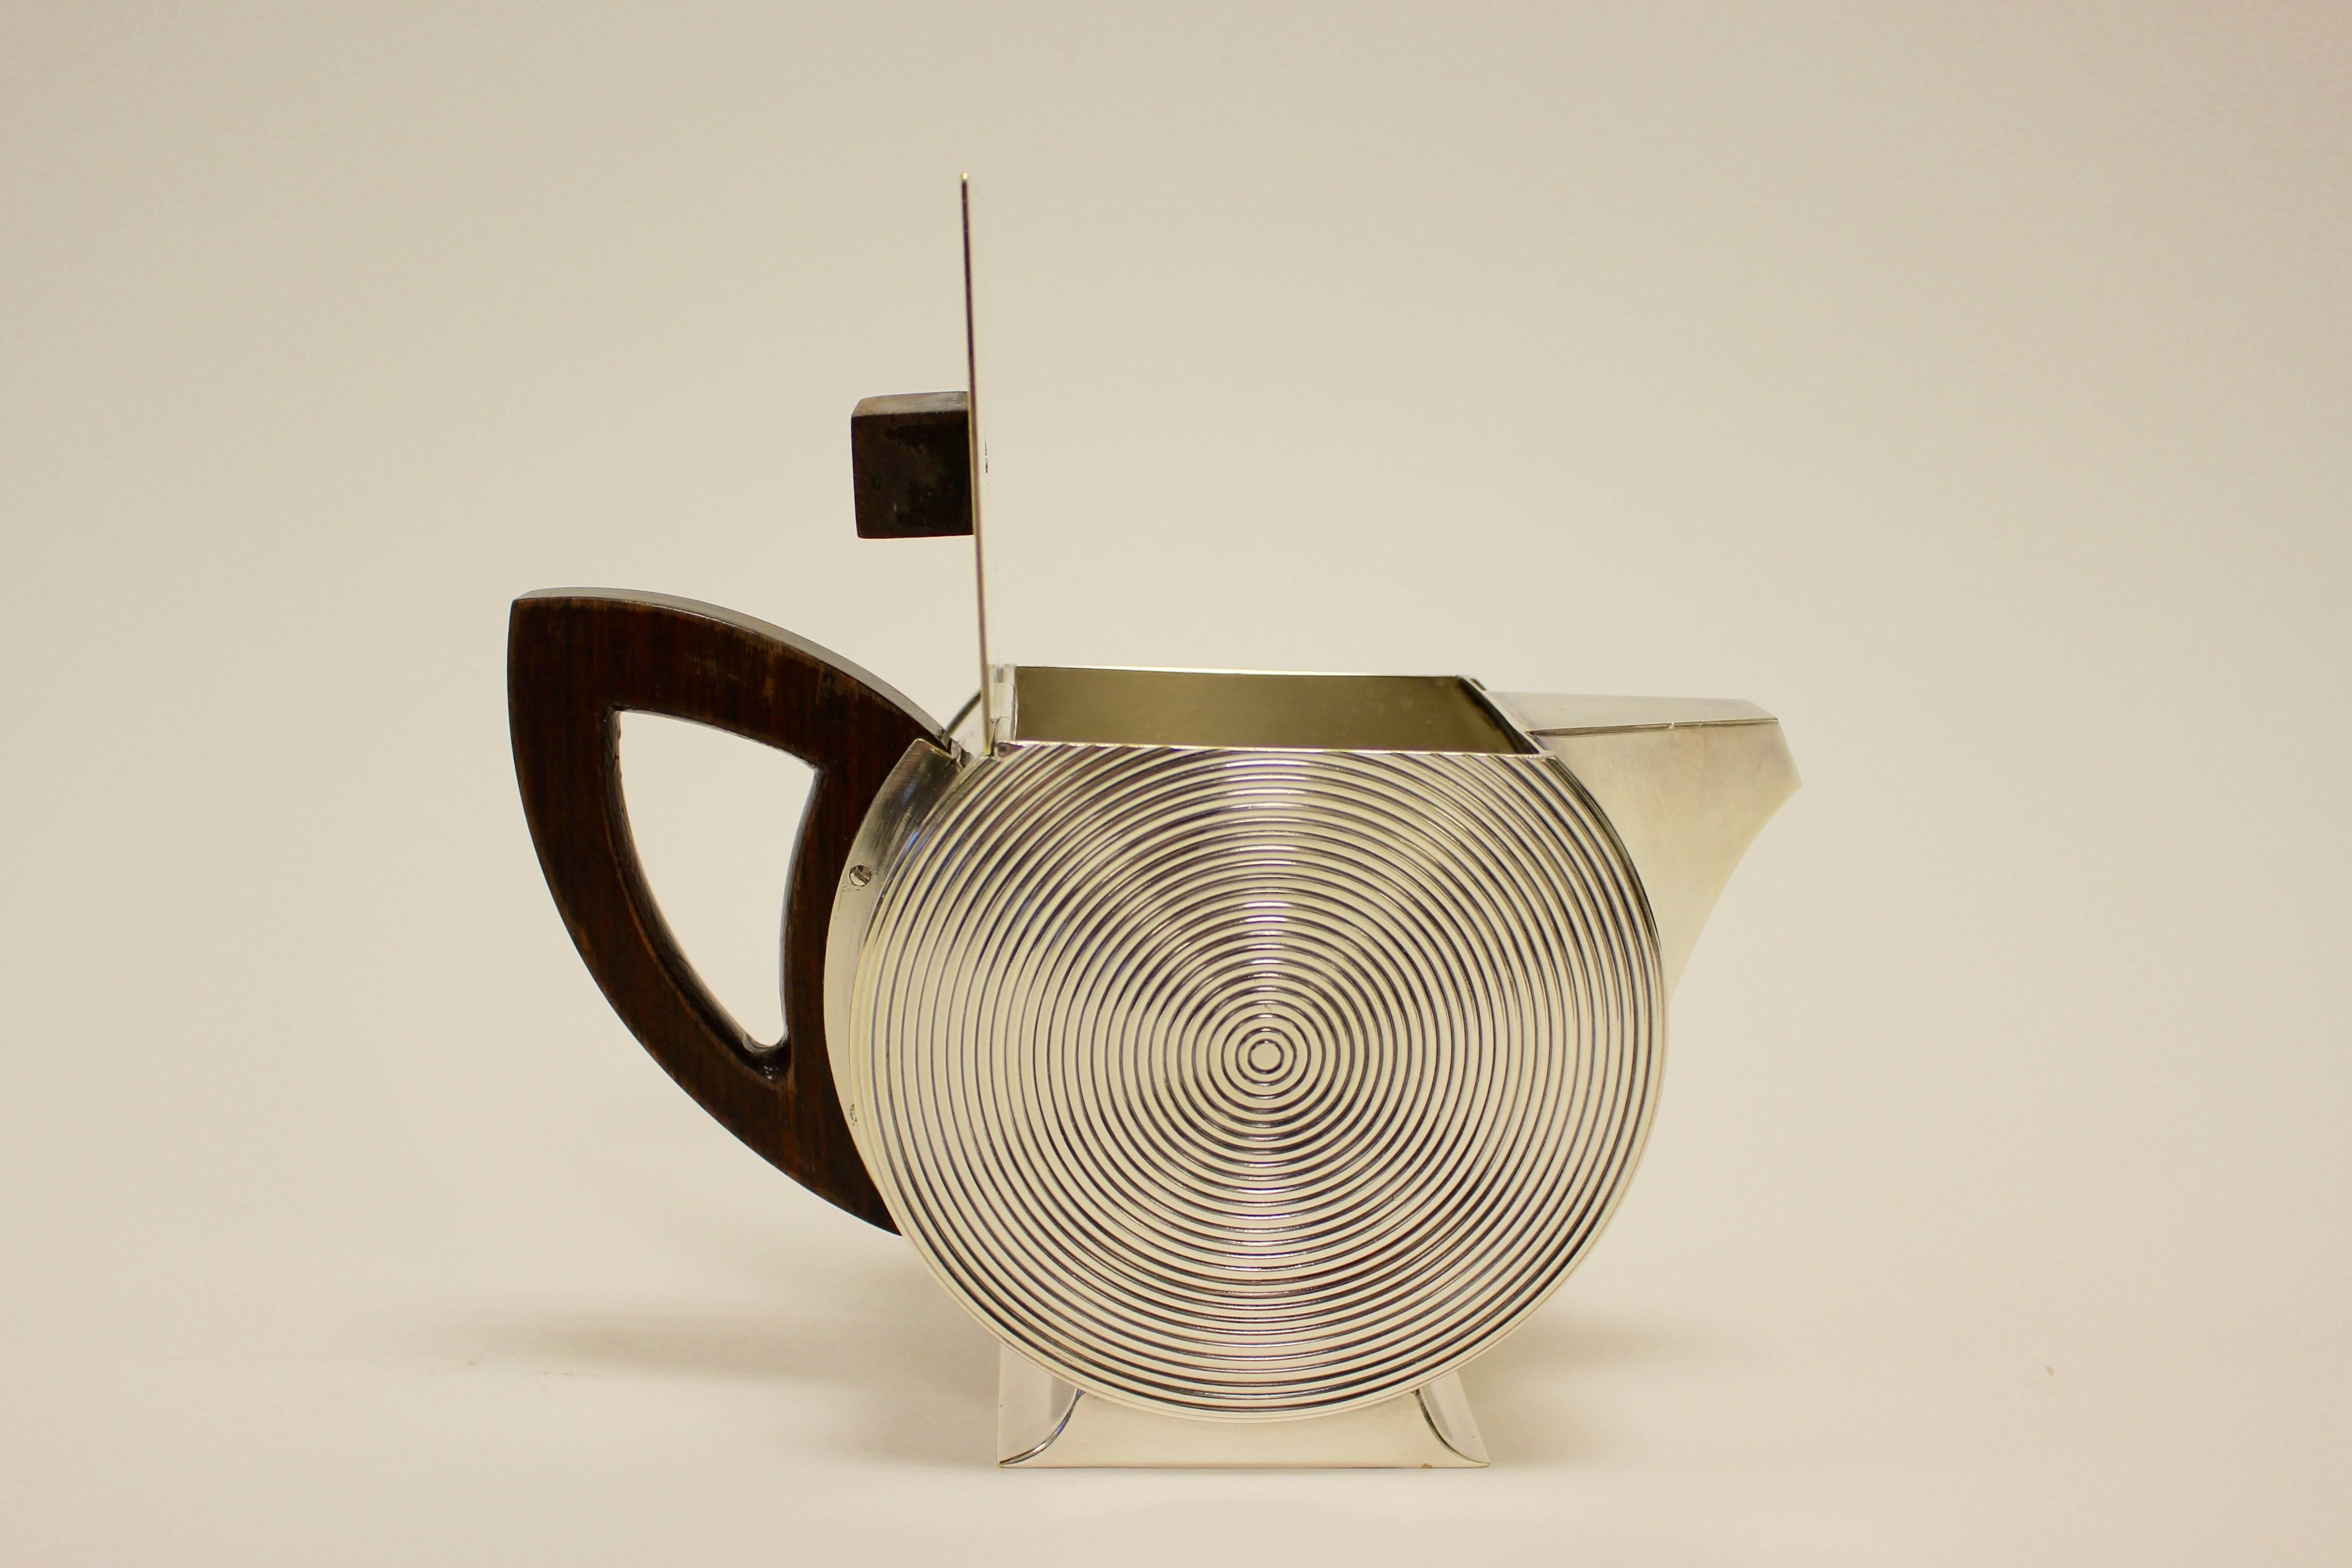 A French silver Art Deco five-piece tea and coffee set from the 20th century. The set comprises a teapot, a coffee pot, a creamer and a covered sugar bowl, all with flattened round bodies cut to the top with hinged covers, ear-shaped wooden handles